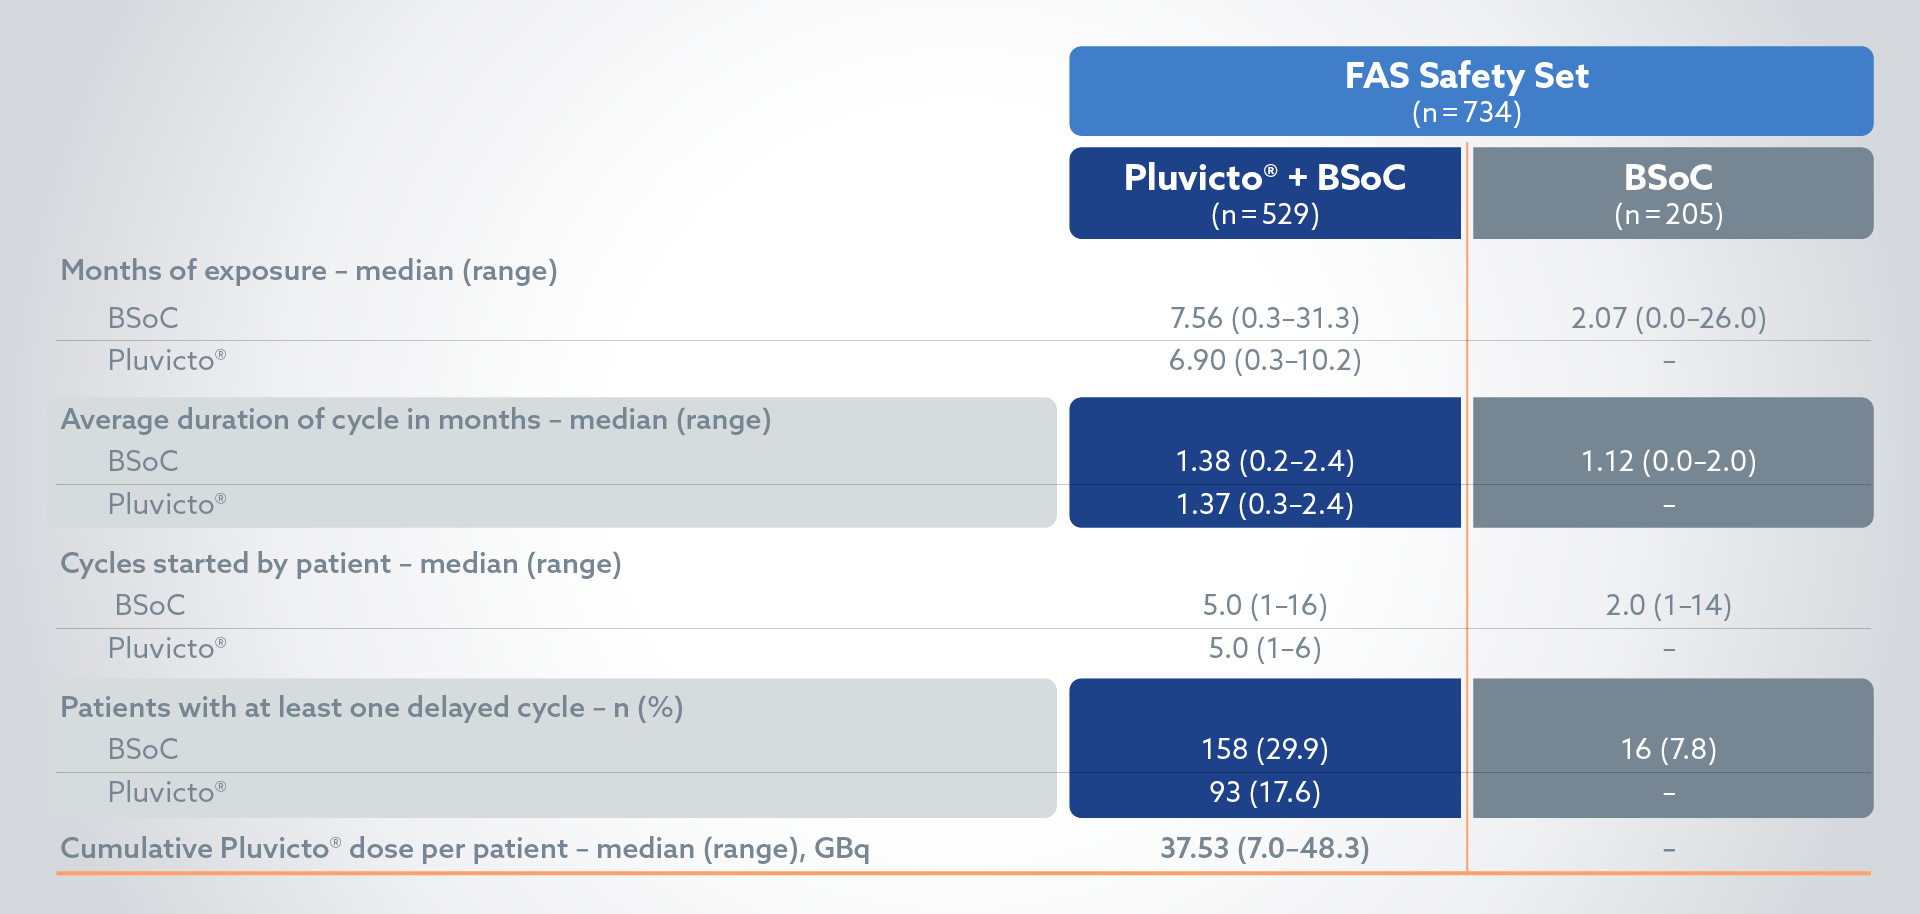 Table showing the FAS safety set in the Pluvicto + BSoC arm vs BSoC alone.